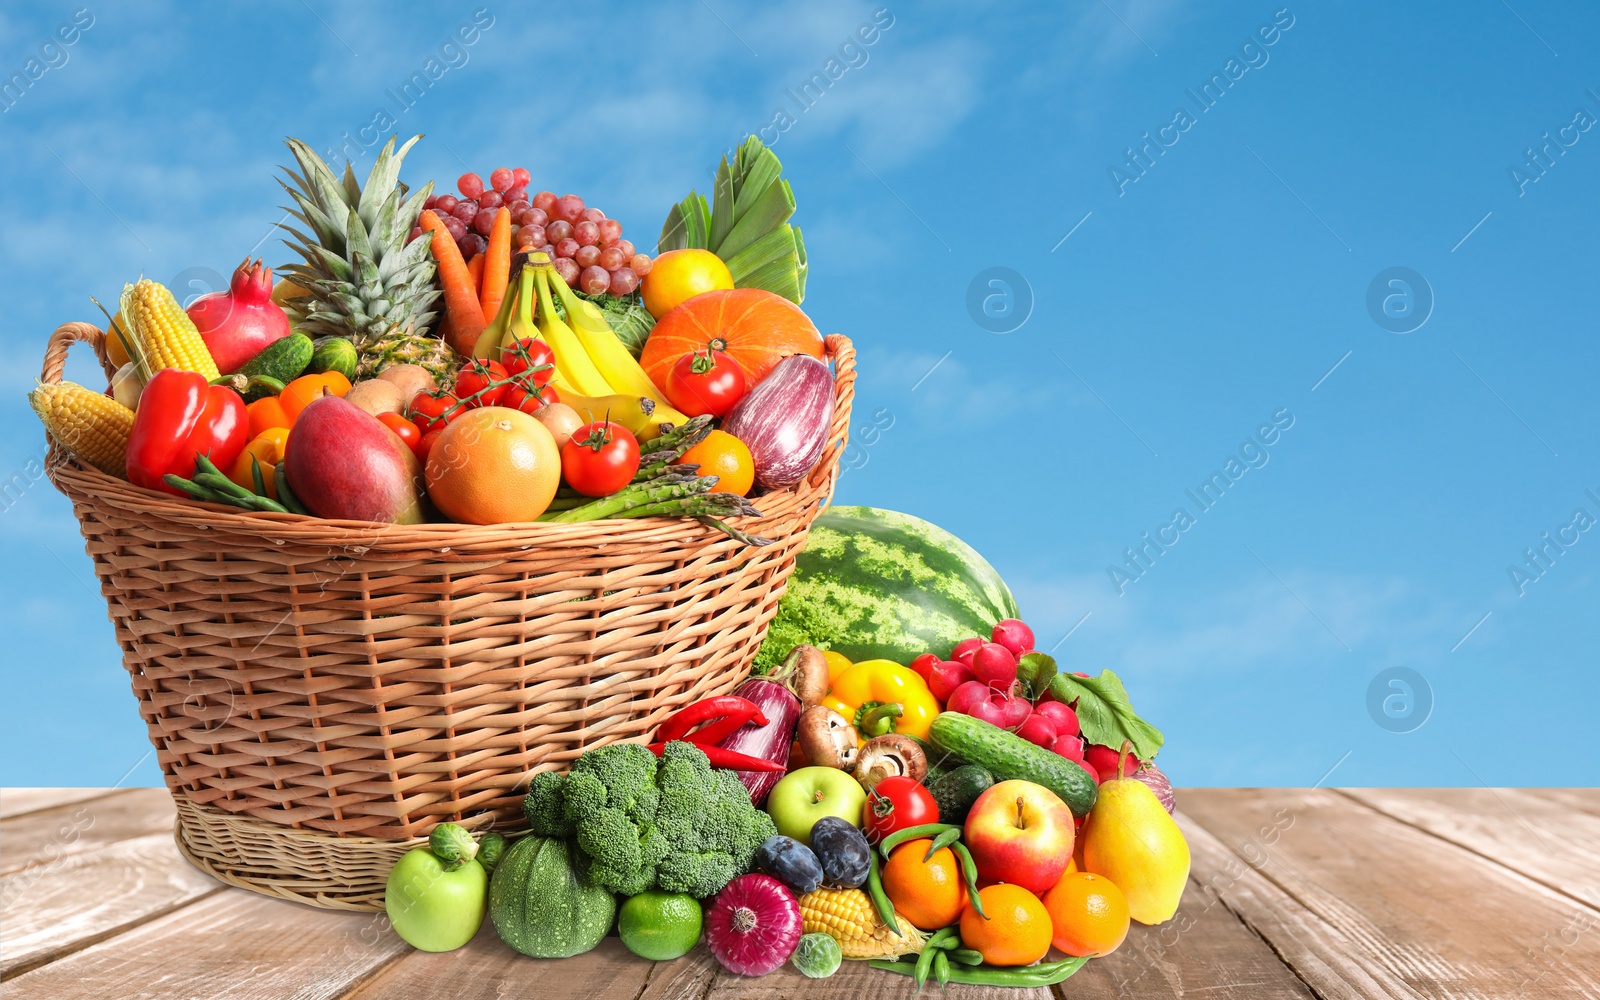 Image of Assortment of fresh organic fruits and vegetables on wooden table outdoors